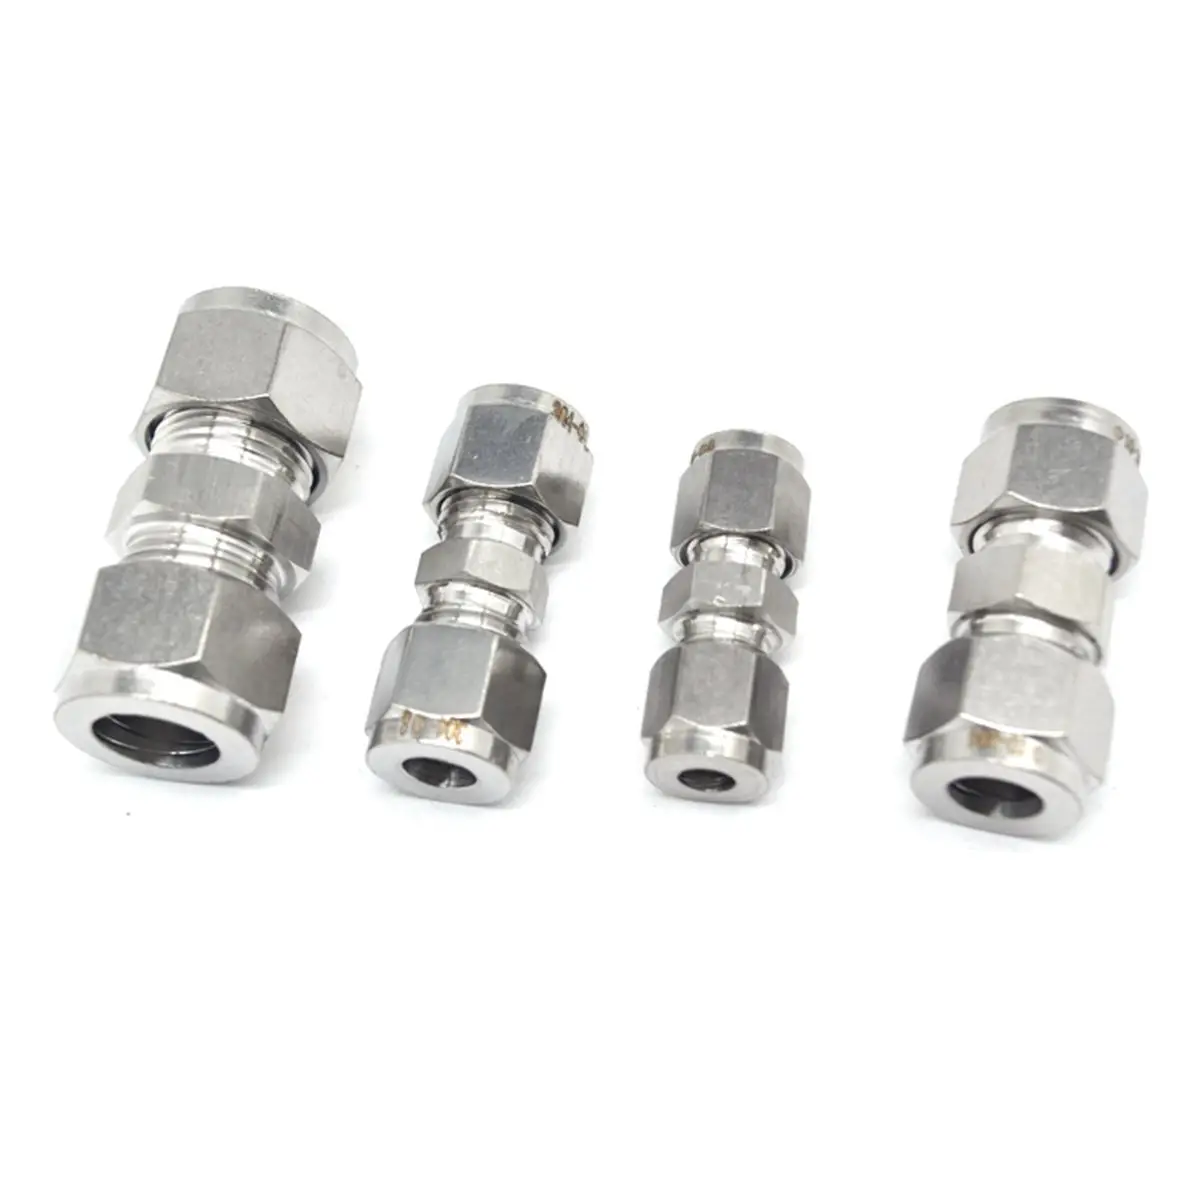 Fit Tube O/D 3-25mm 1/8" 1/4" 3/8" 1/2" 304 Stainless Equal Straight Ferrule Pneumatic Air Compression Fitting